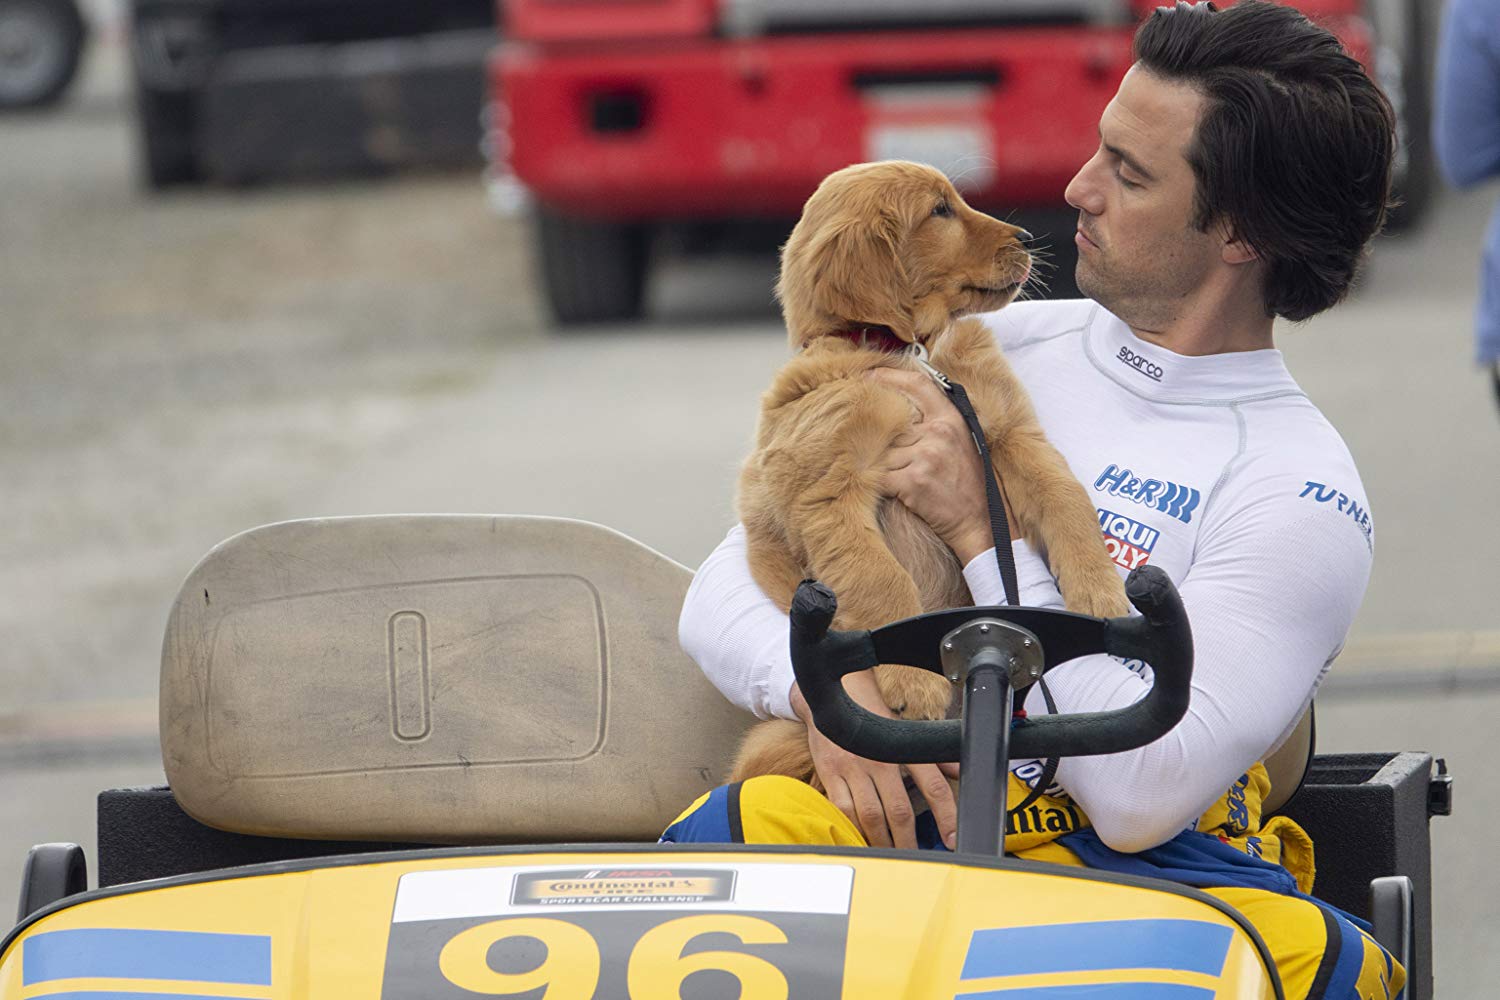 Hollywood Insider review The Art Of Racing In The Rain Milo Ventimiglia, Amanda Seyfried, Kevin Costner, Dog movies